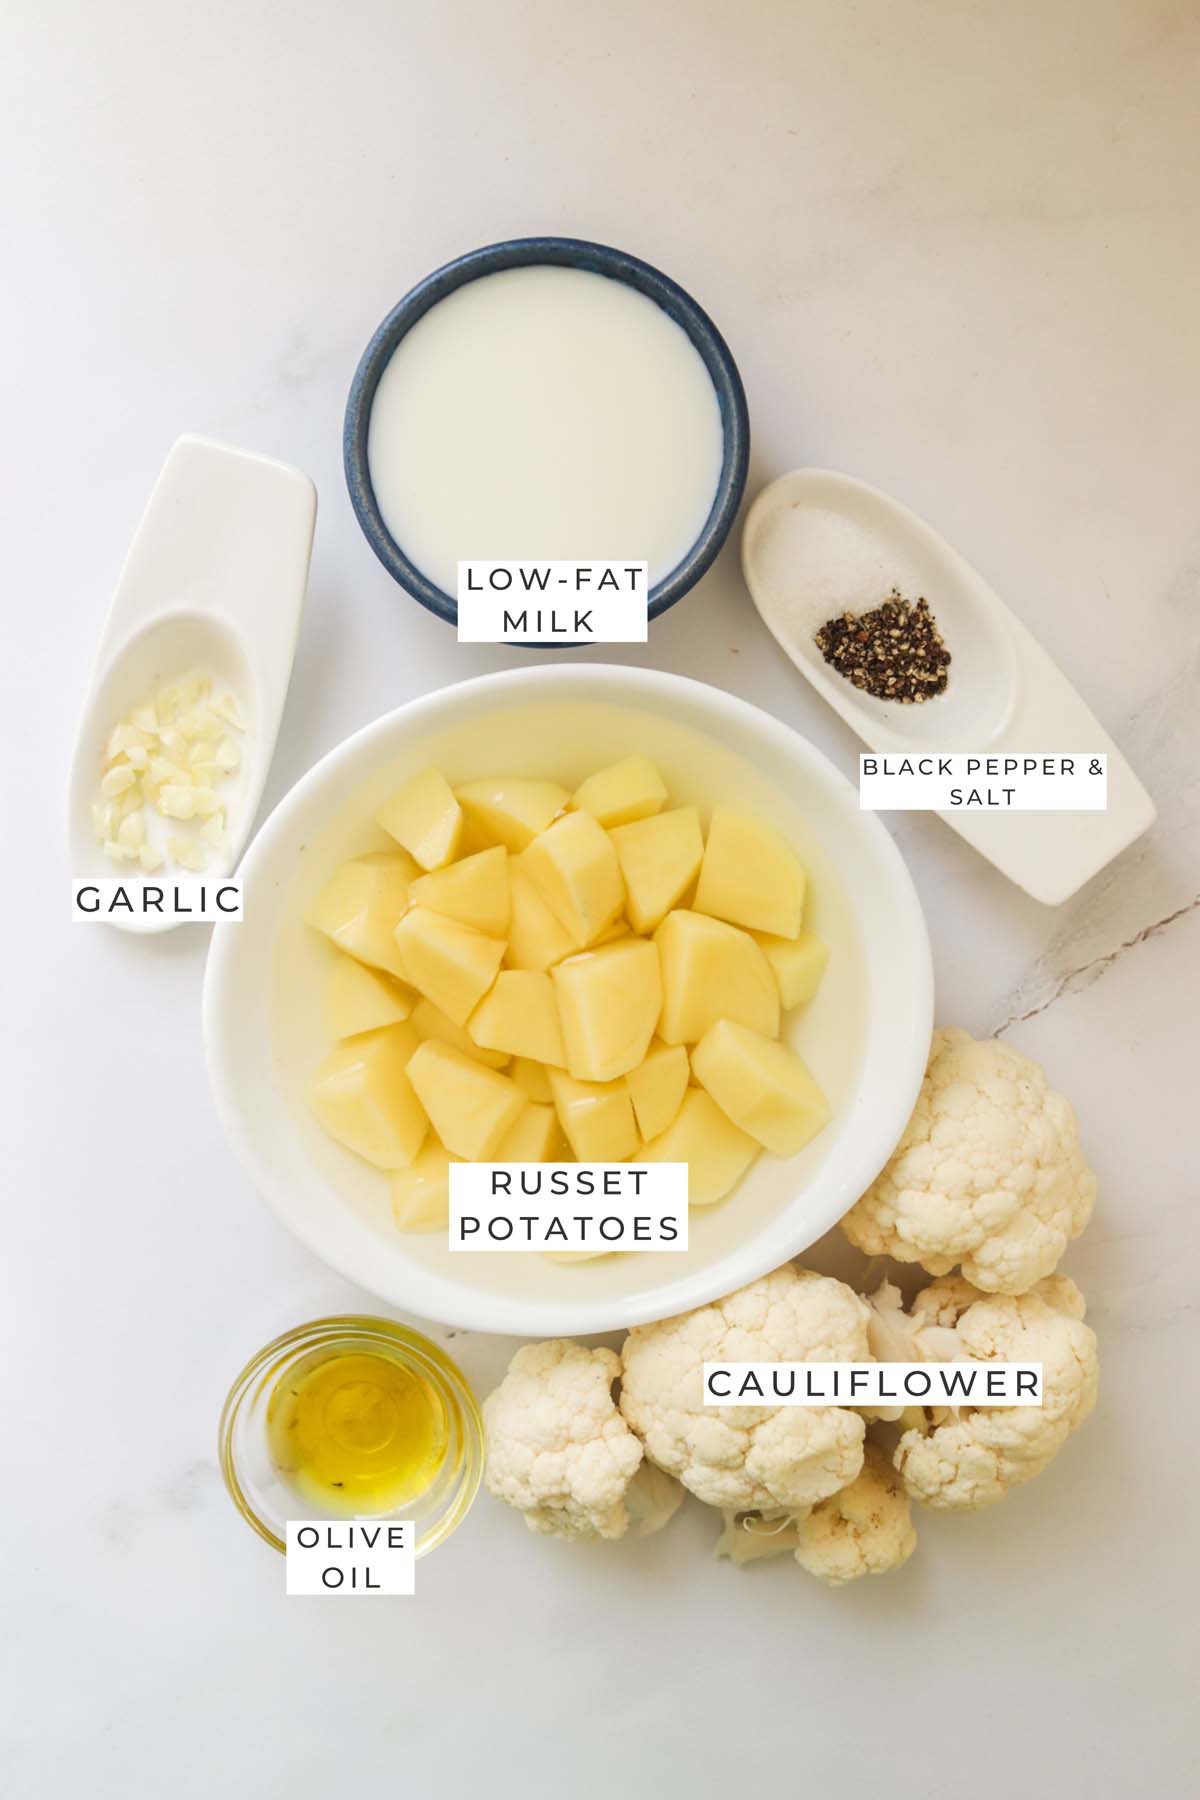 Labeled ingredients to make the mashed potatoes.